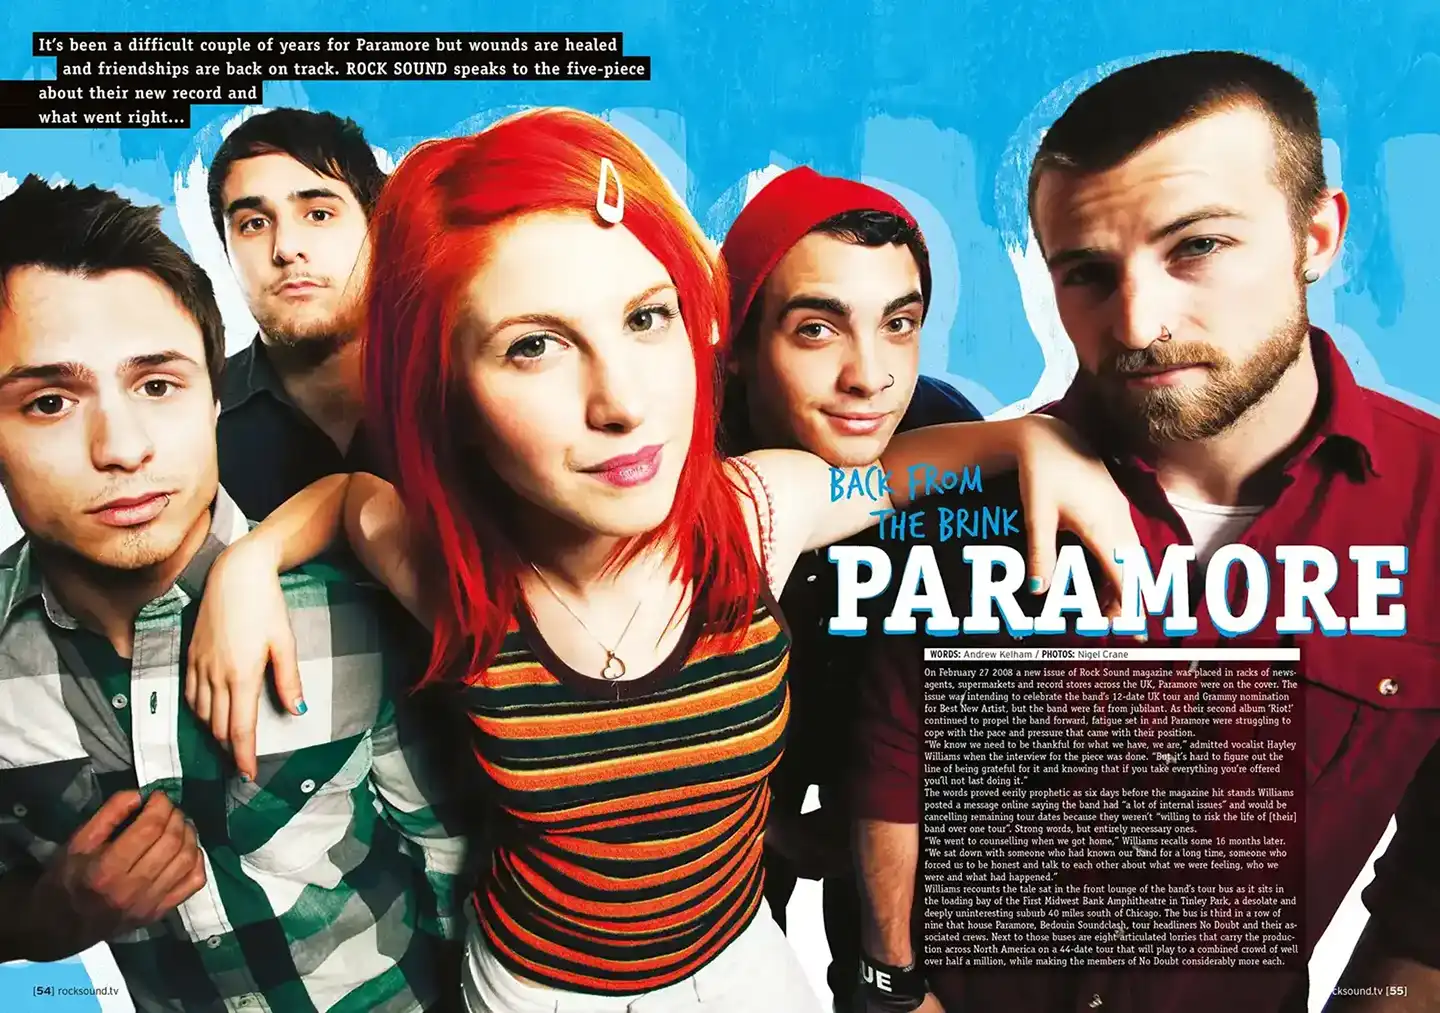 Rock Sound Paramore Article